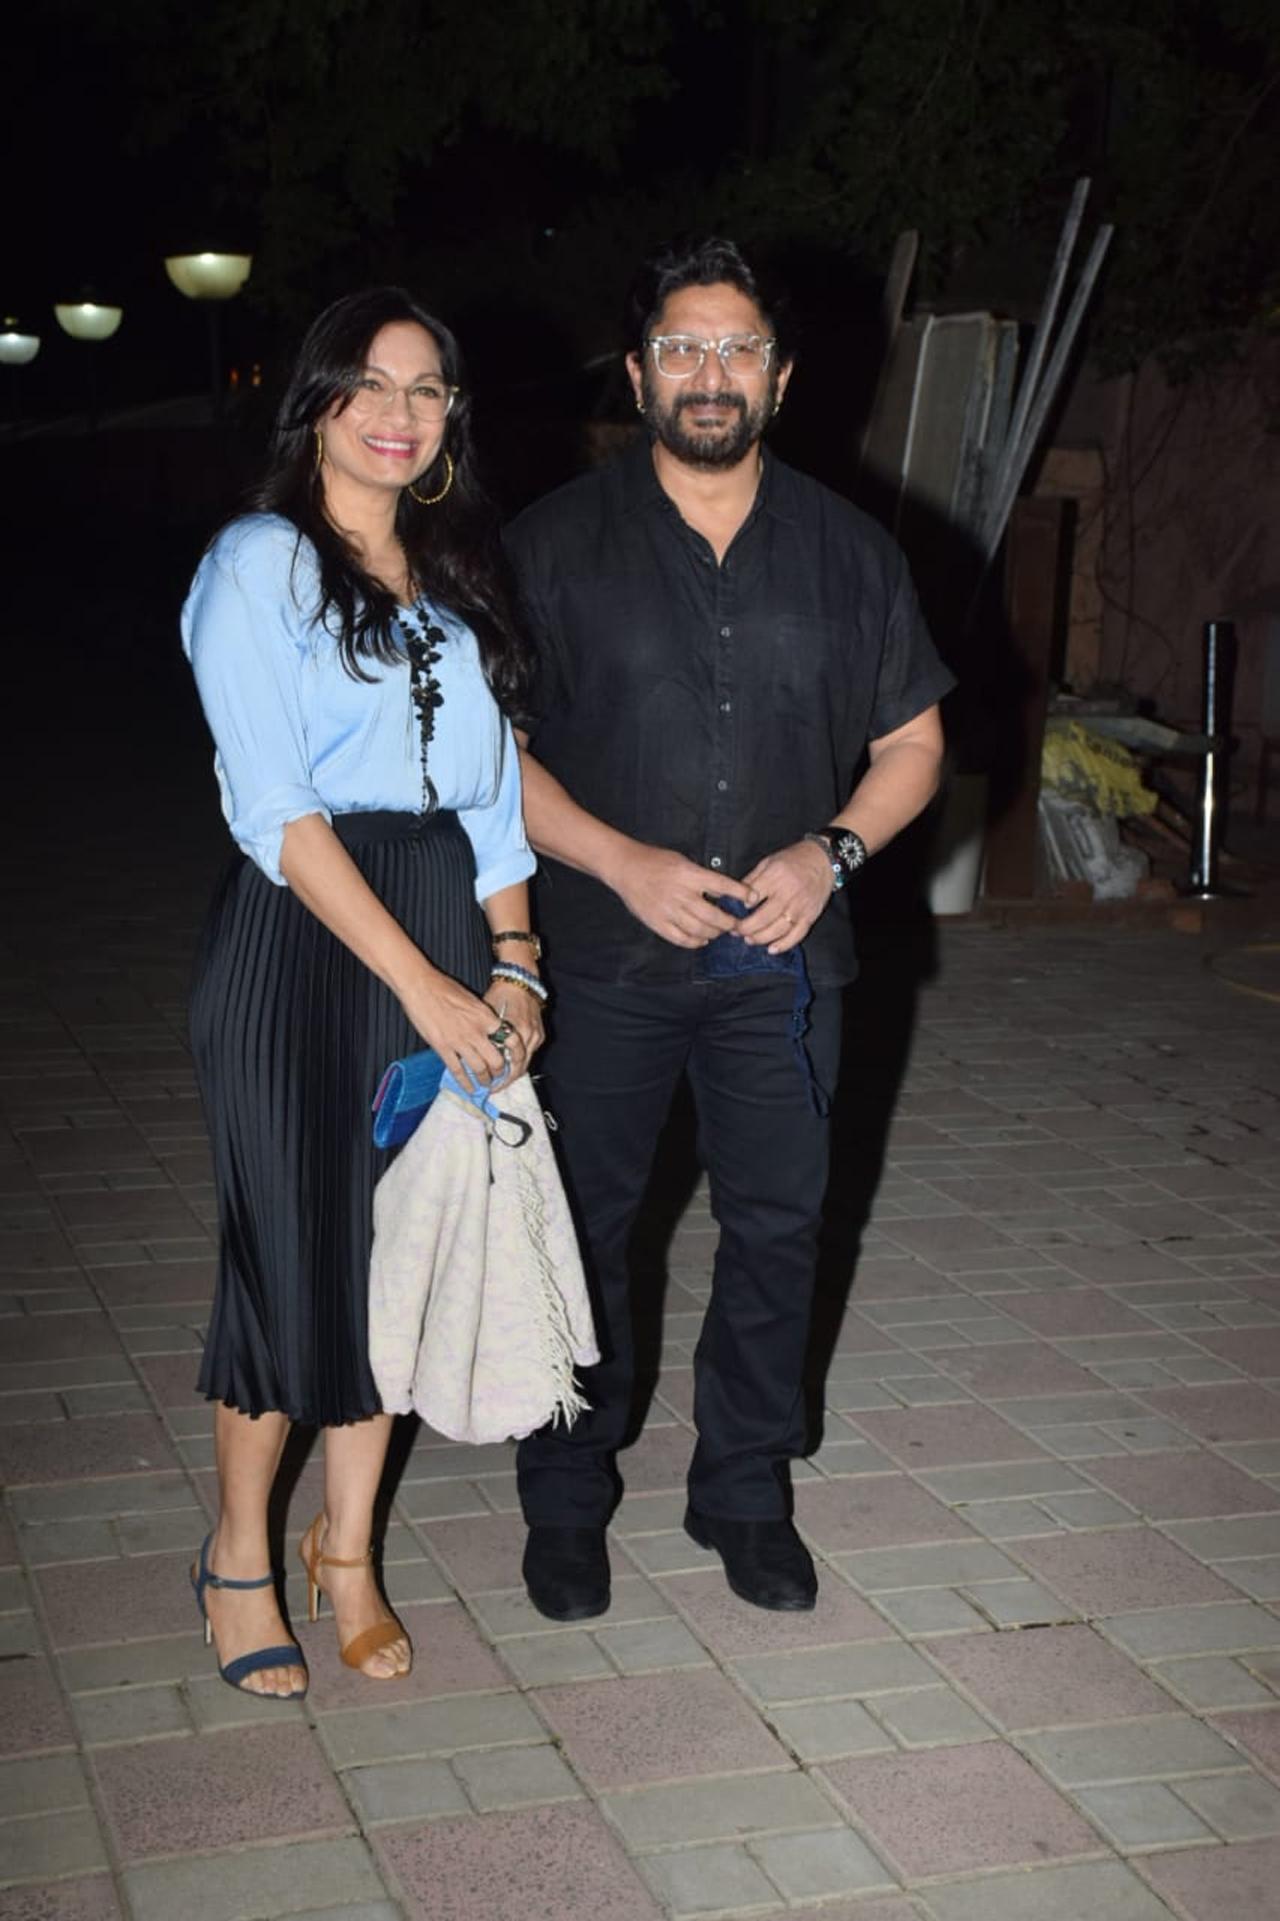 Arshad Warsi and Maria Goretti posed for the paparazzi as they arrived for the screening. While Maria was seen in a blue shirt, paired with a black skirt, Arshad opted for an all-black casual look.